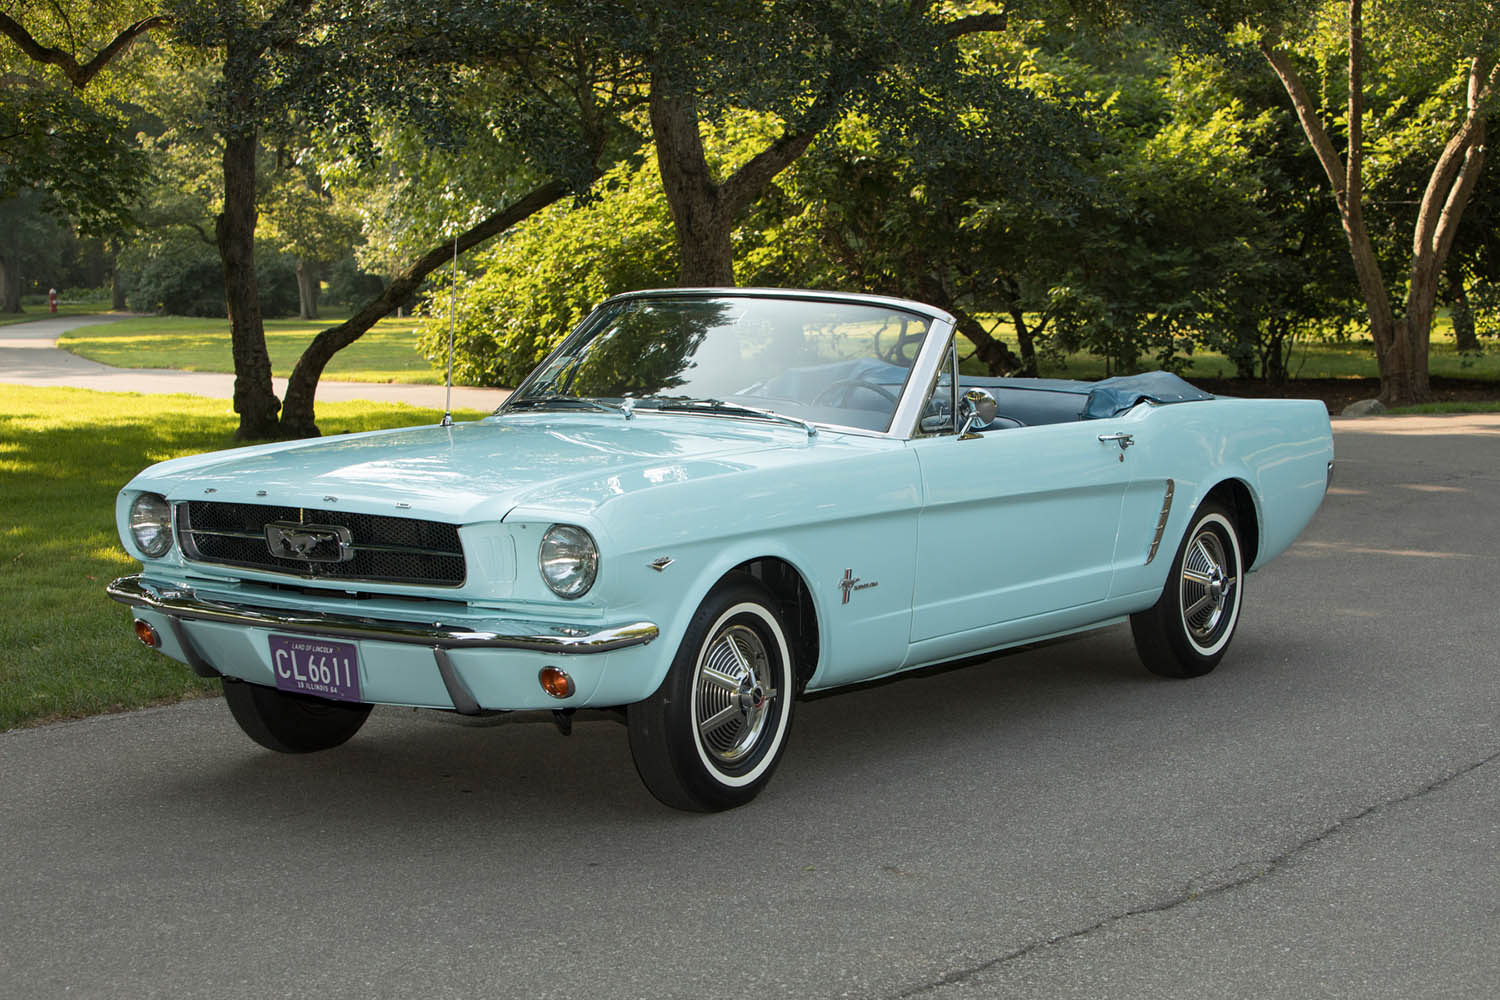 1960s-era Ford Mustang in aqua parked in front of trees